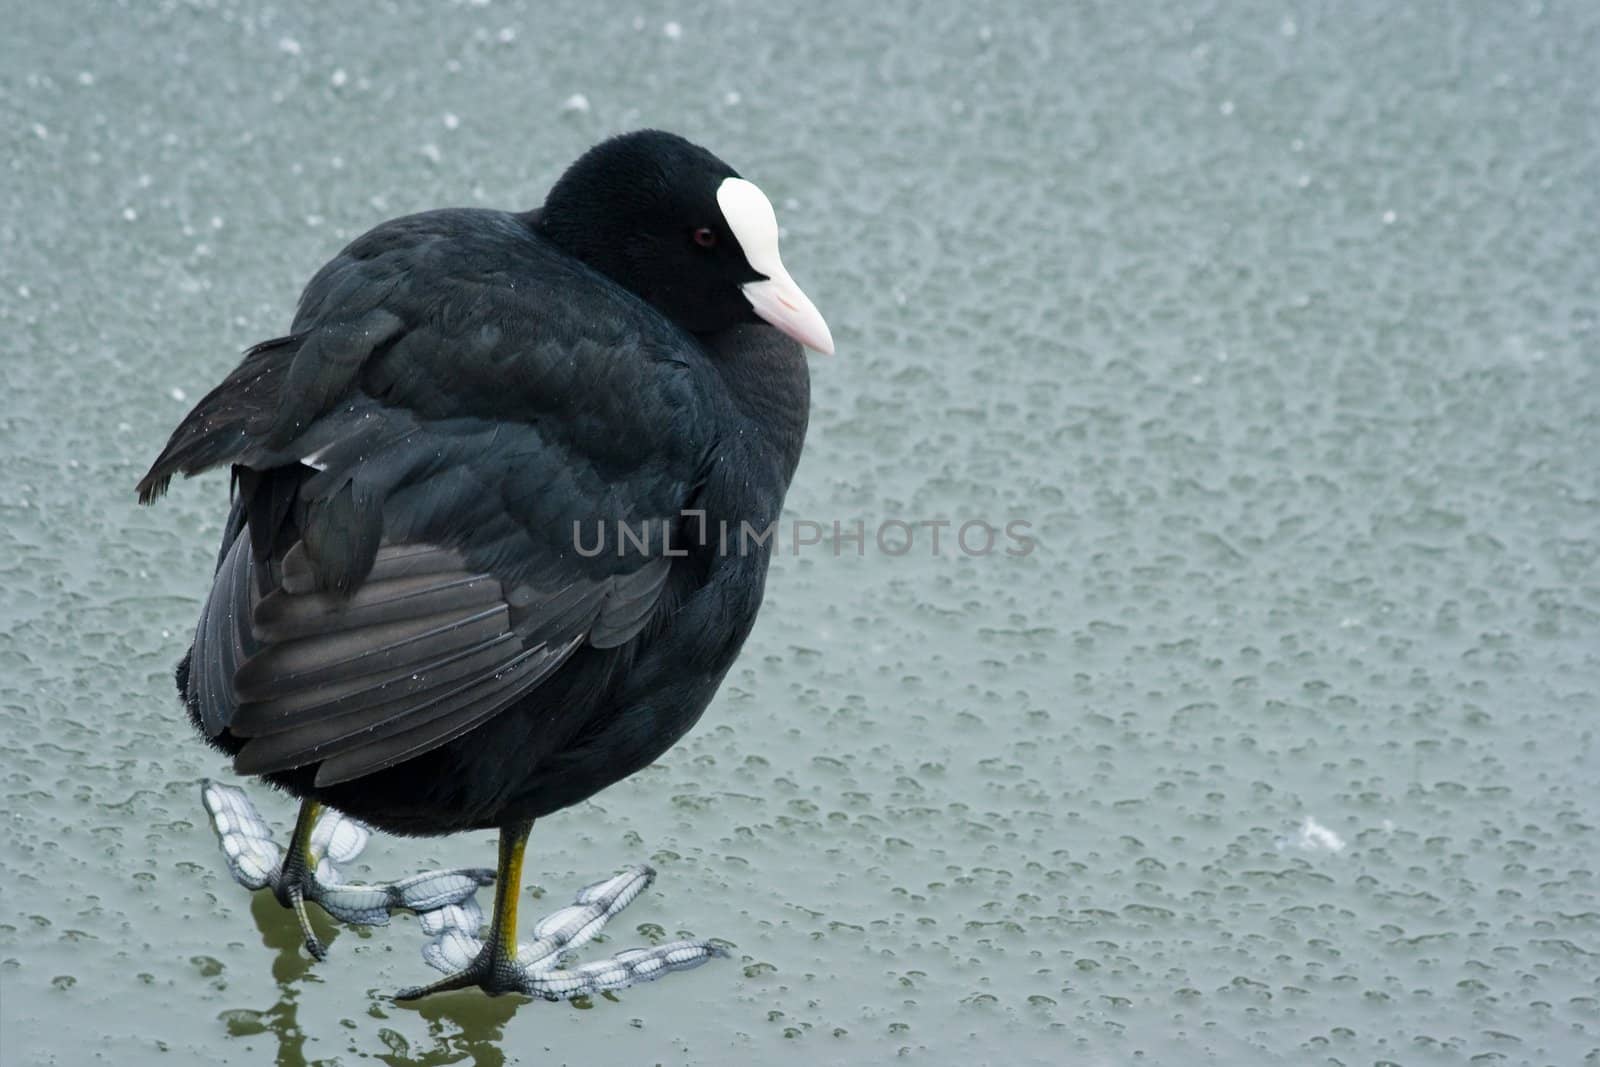 Coot unhappy and cold in winter and snow on melting ice 